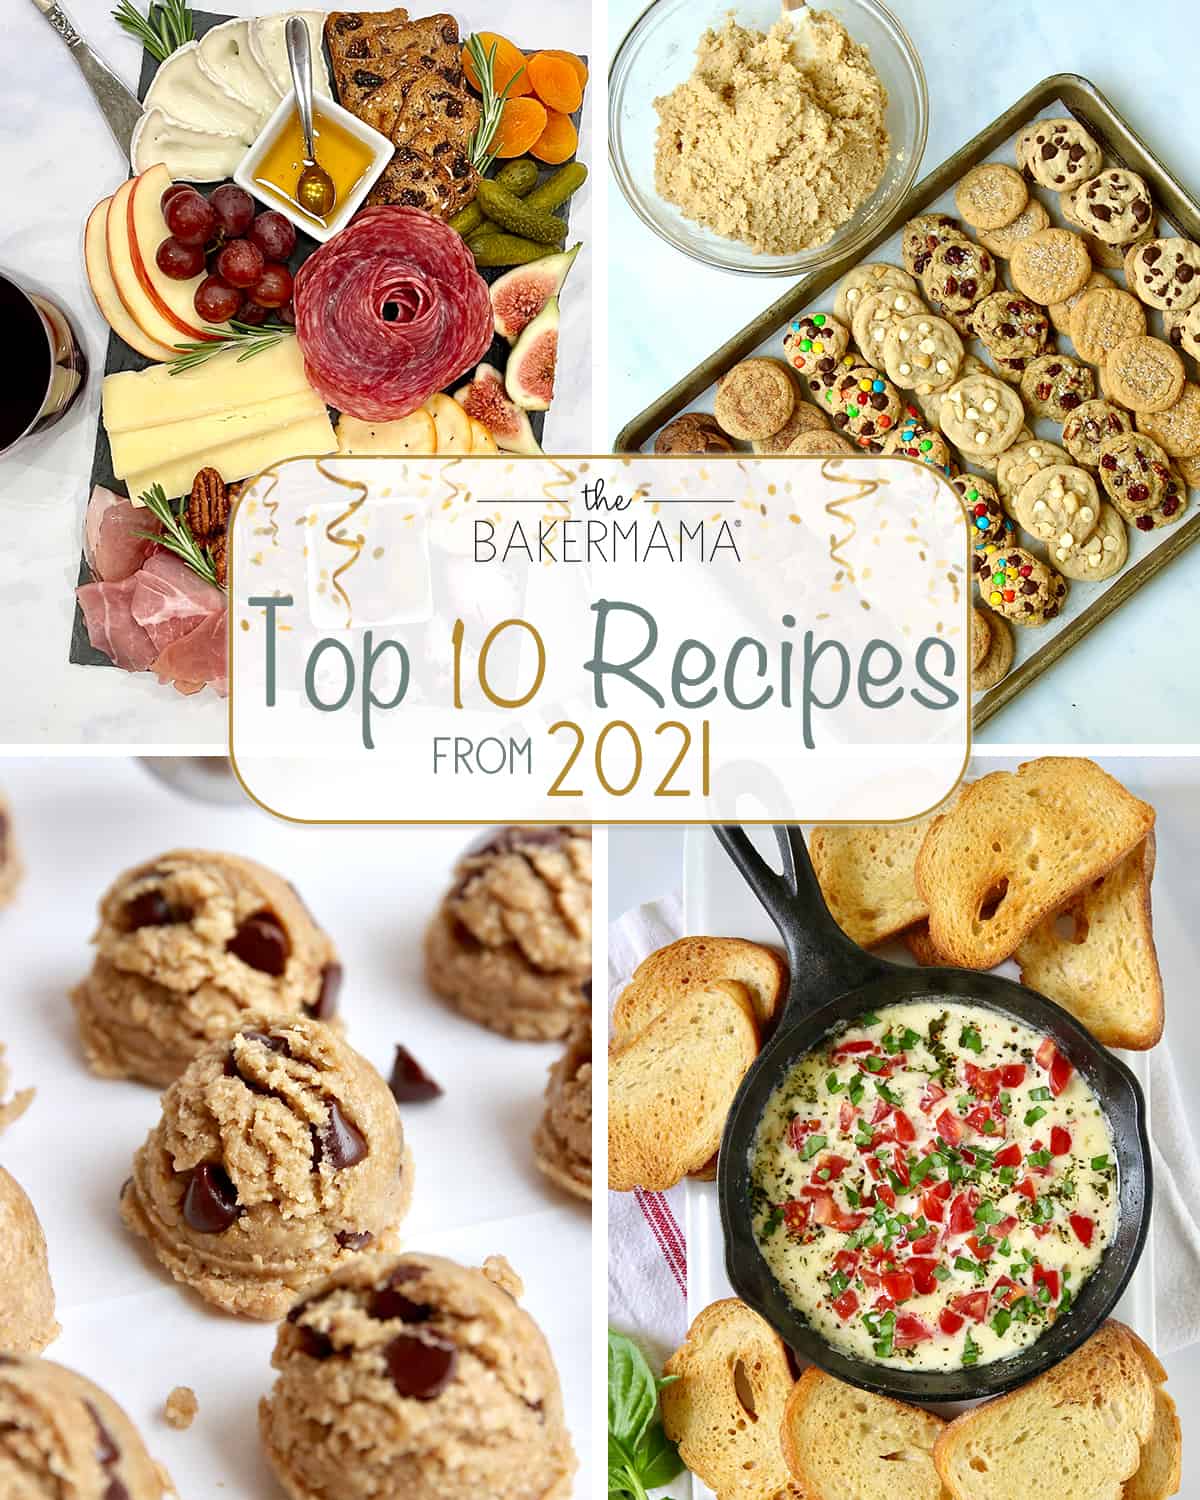 Top Ten Recipes From 2021 by The BakerMama